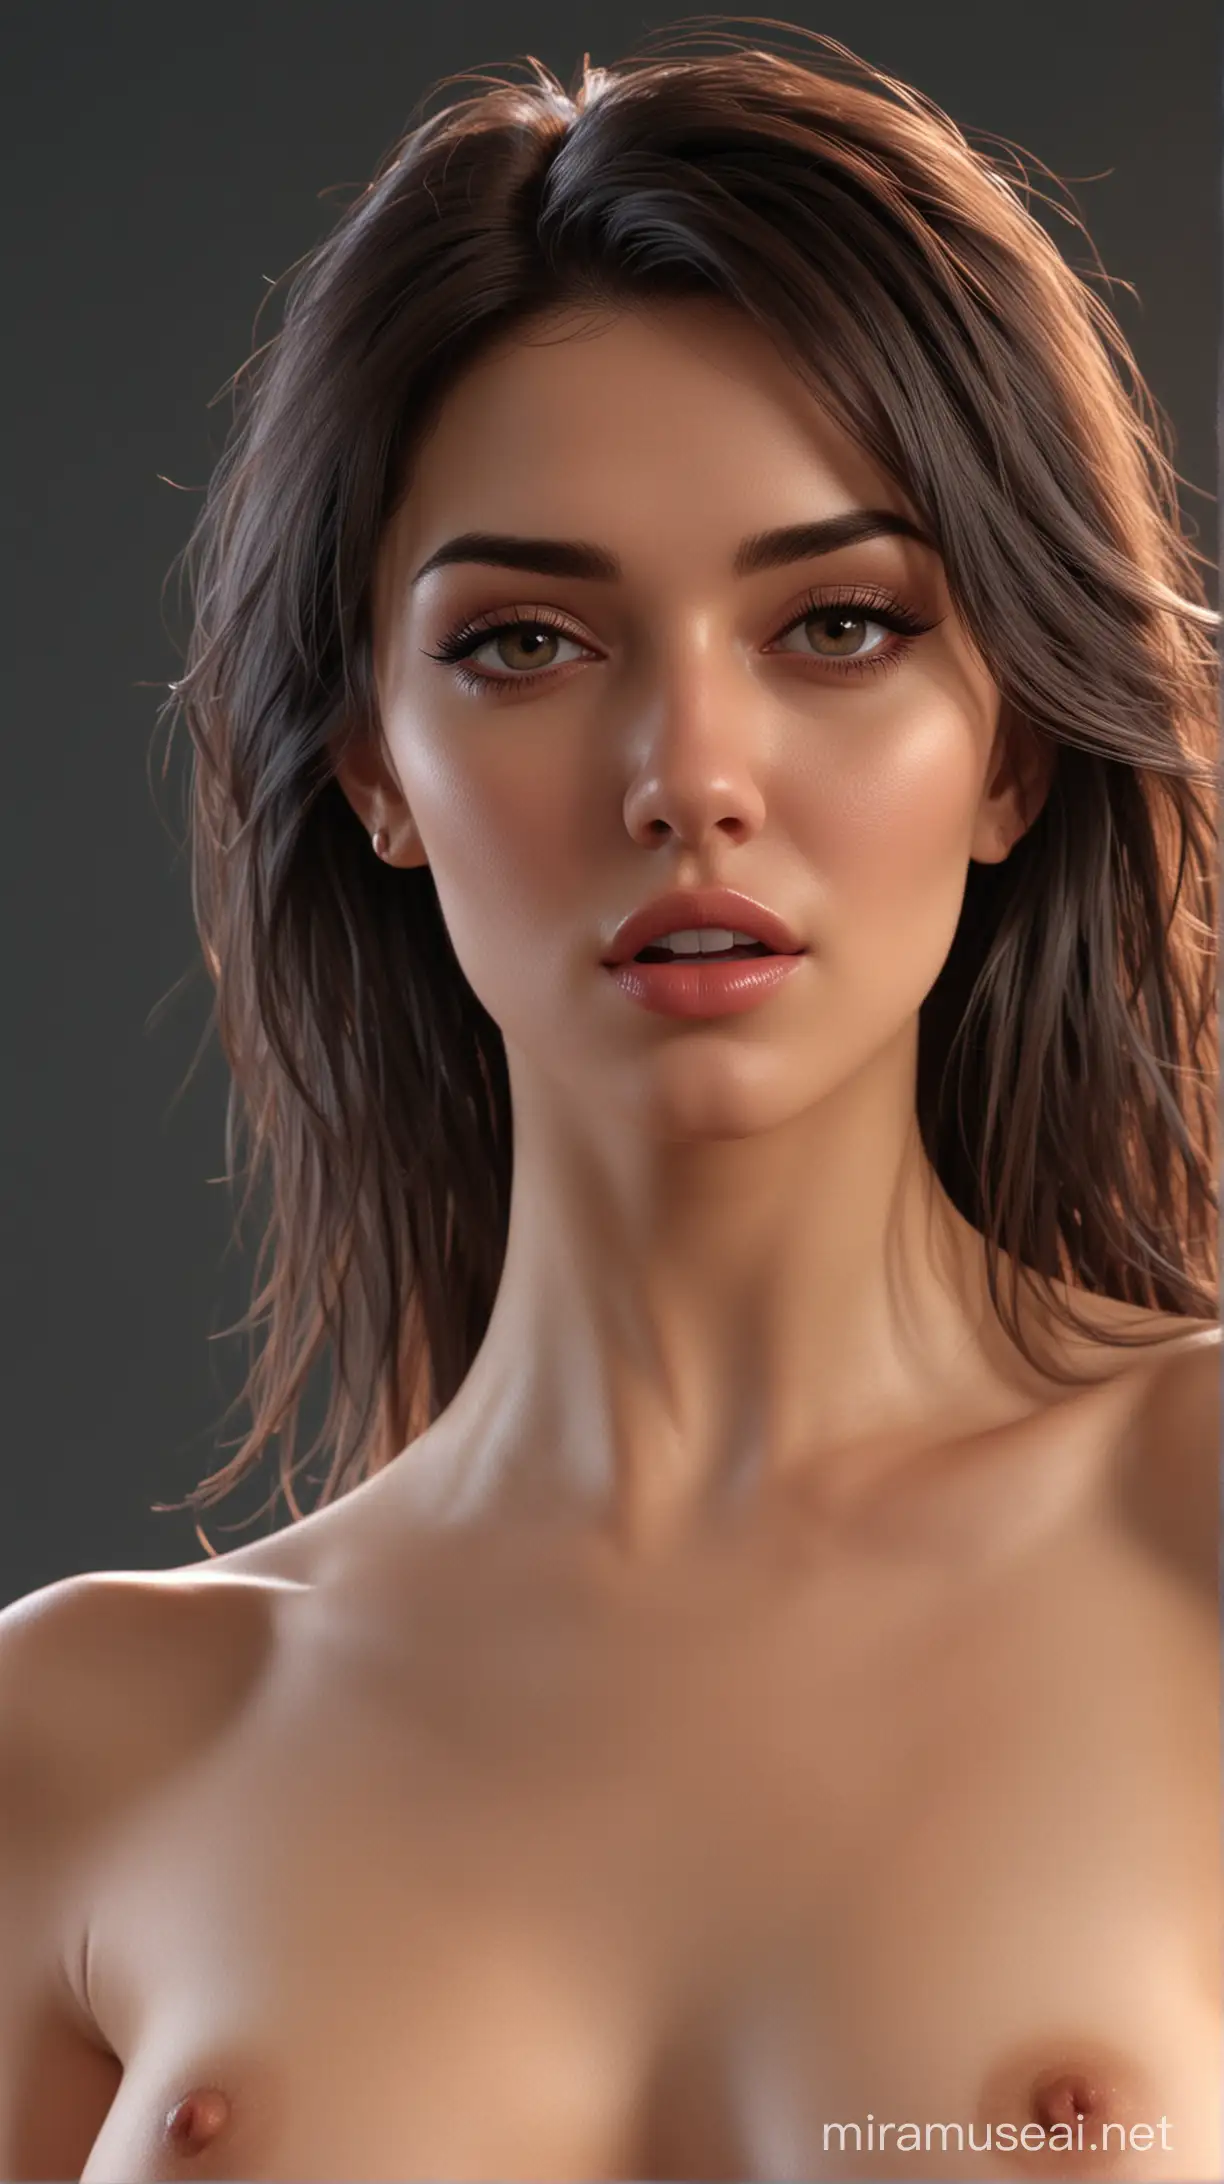 sexy half naked woman with wild passionate desire.  in realism style, 3d-animation